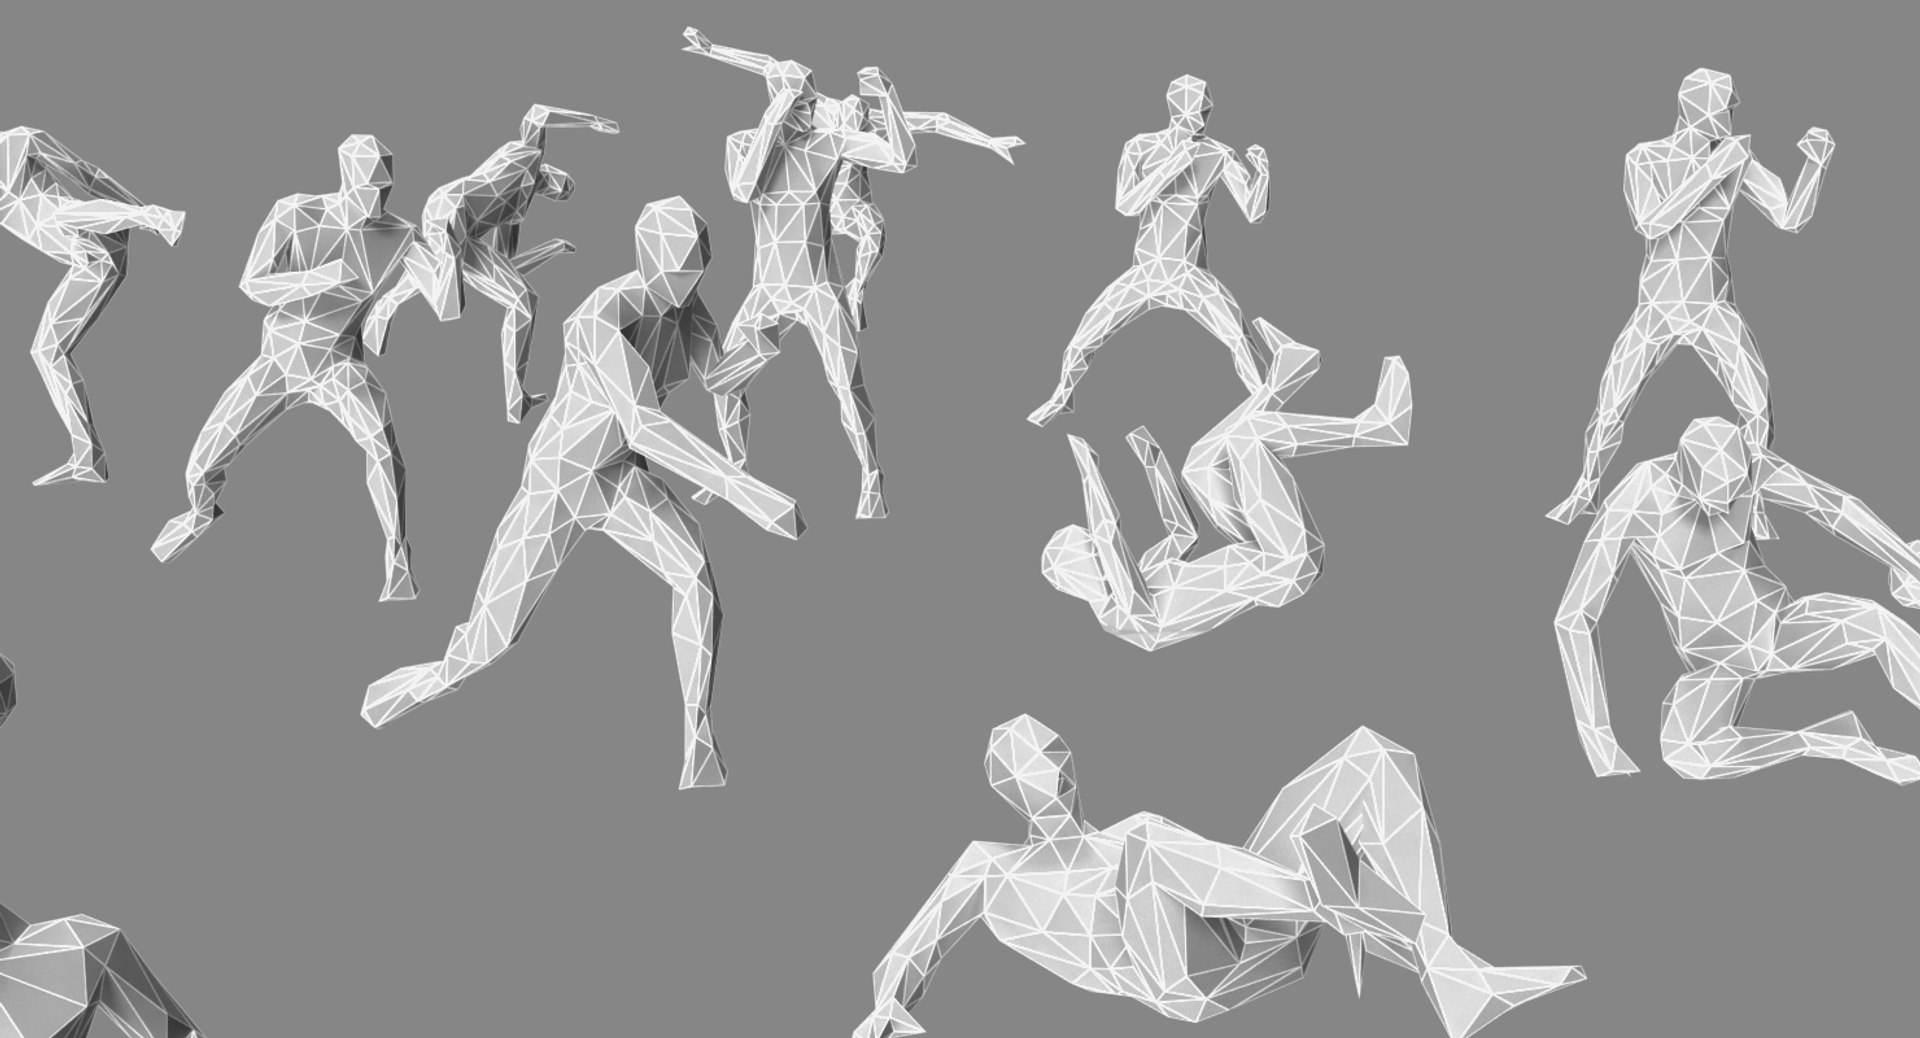 character poses study | Stable Diffusion